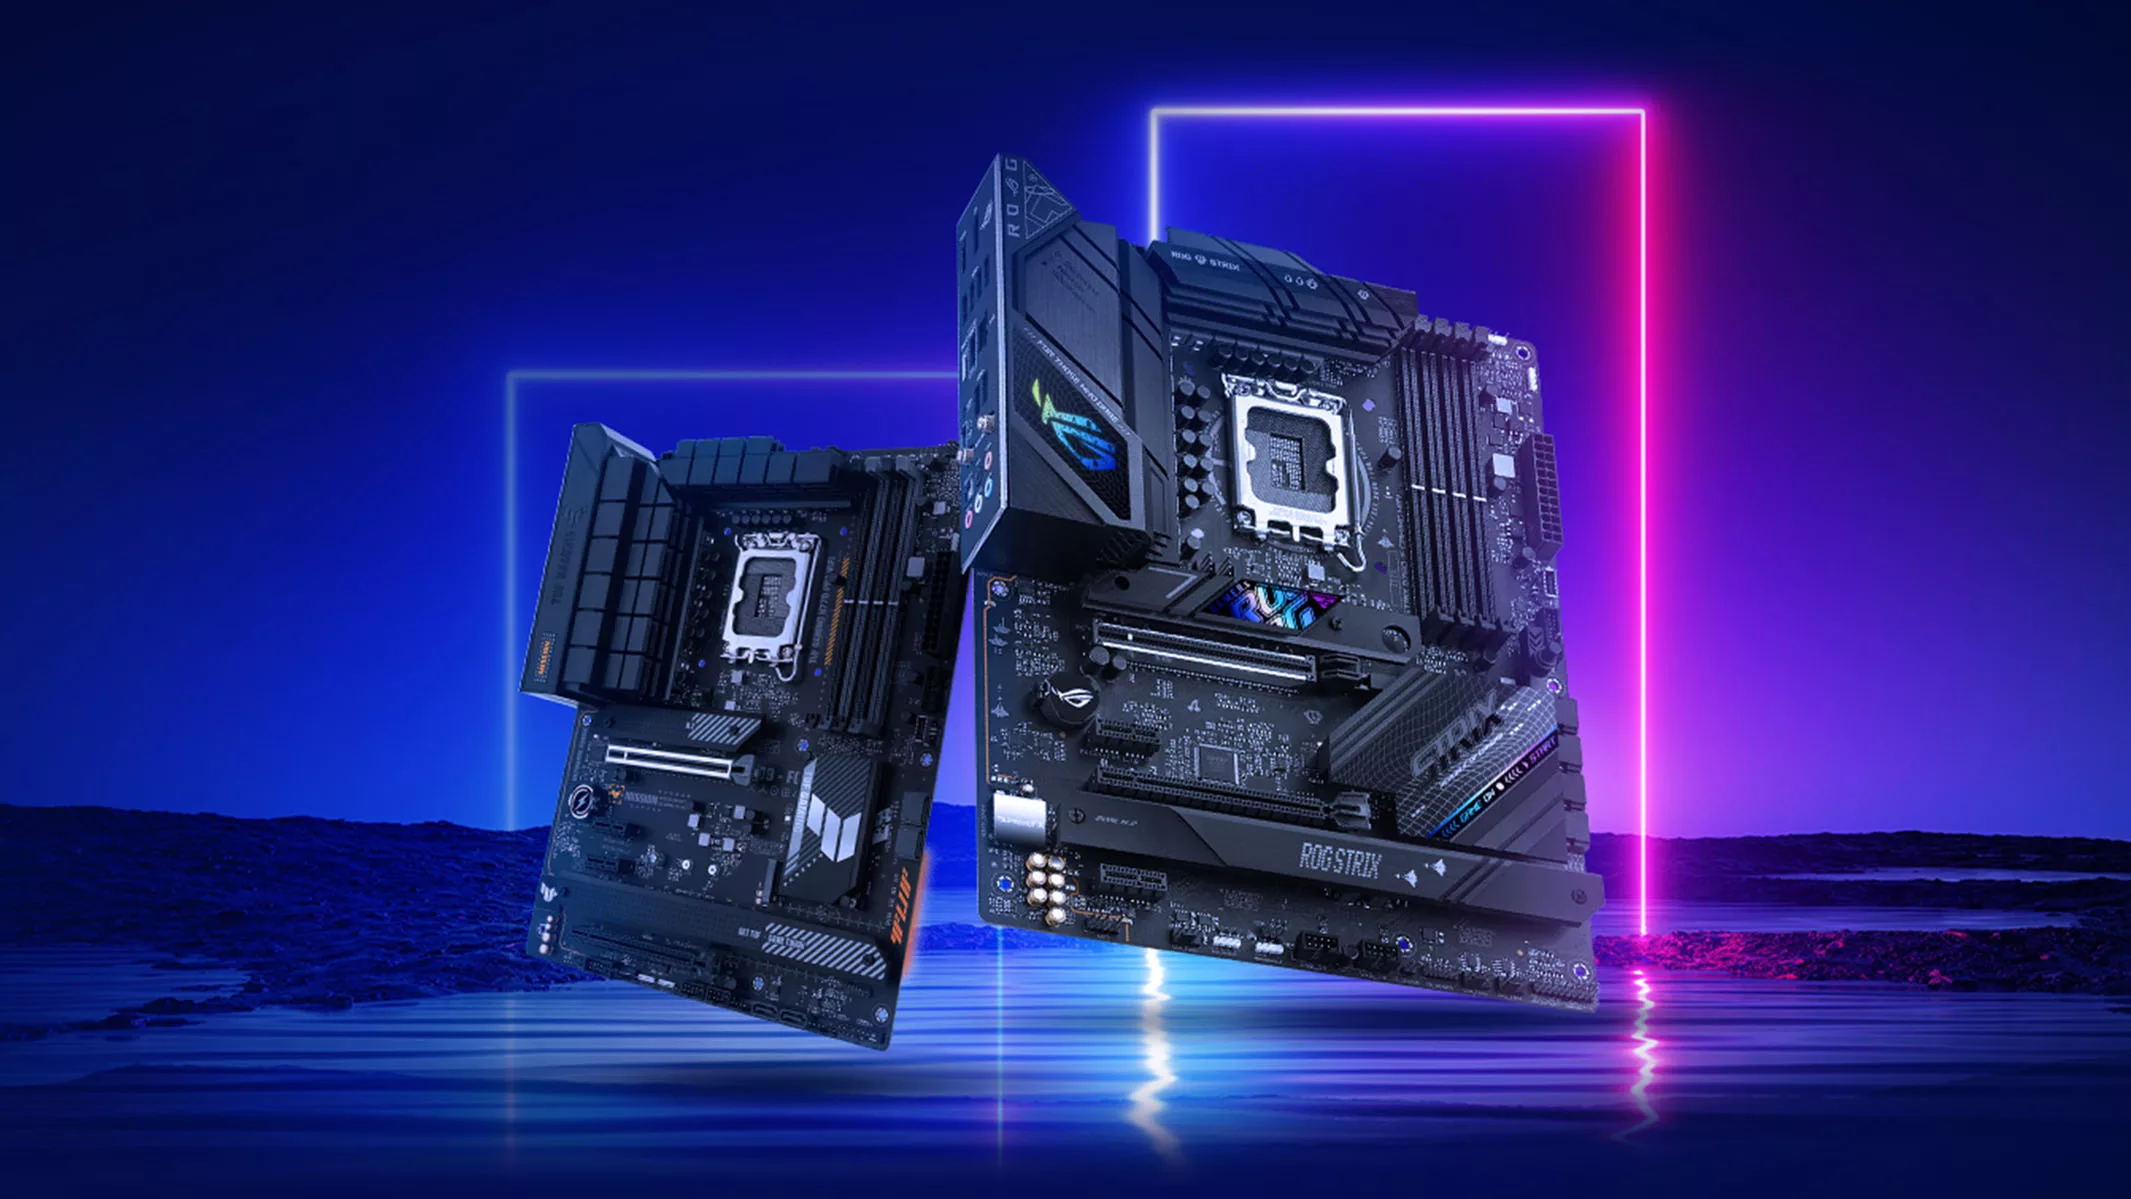 ROG's new Z790 and B760 motherboards give you powerful options for your  next Intel build | ROG - Republic of Gamers Bangladesh